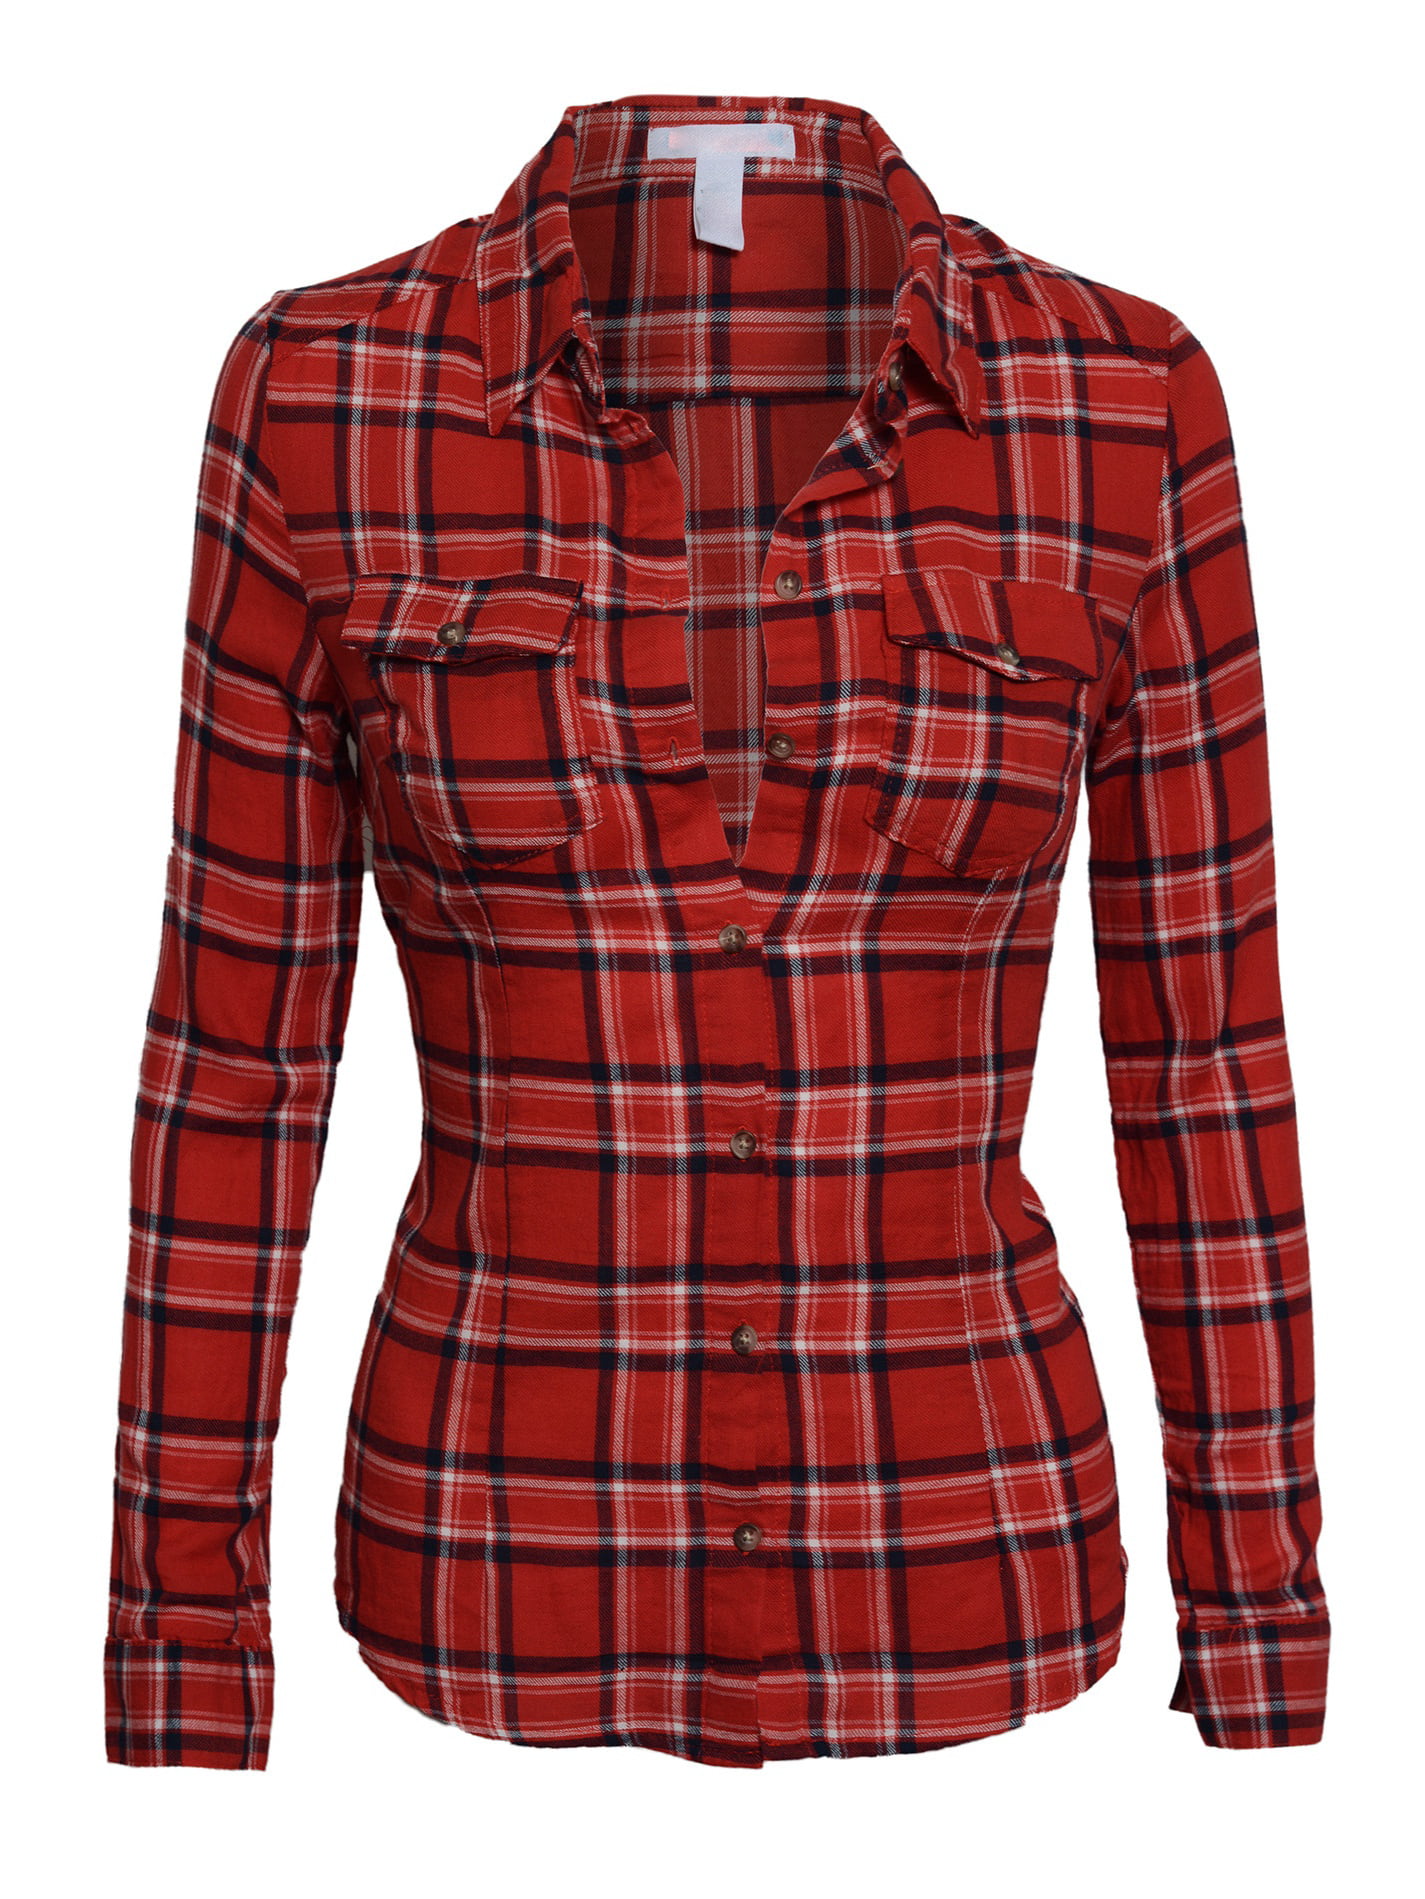 Hot From Hollywood - Women's Classic Collar Button Down Long Sleeve ...